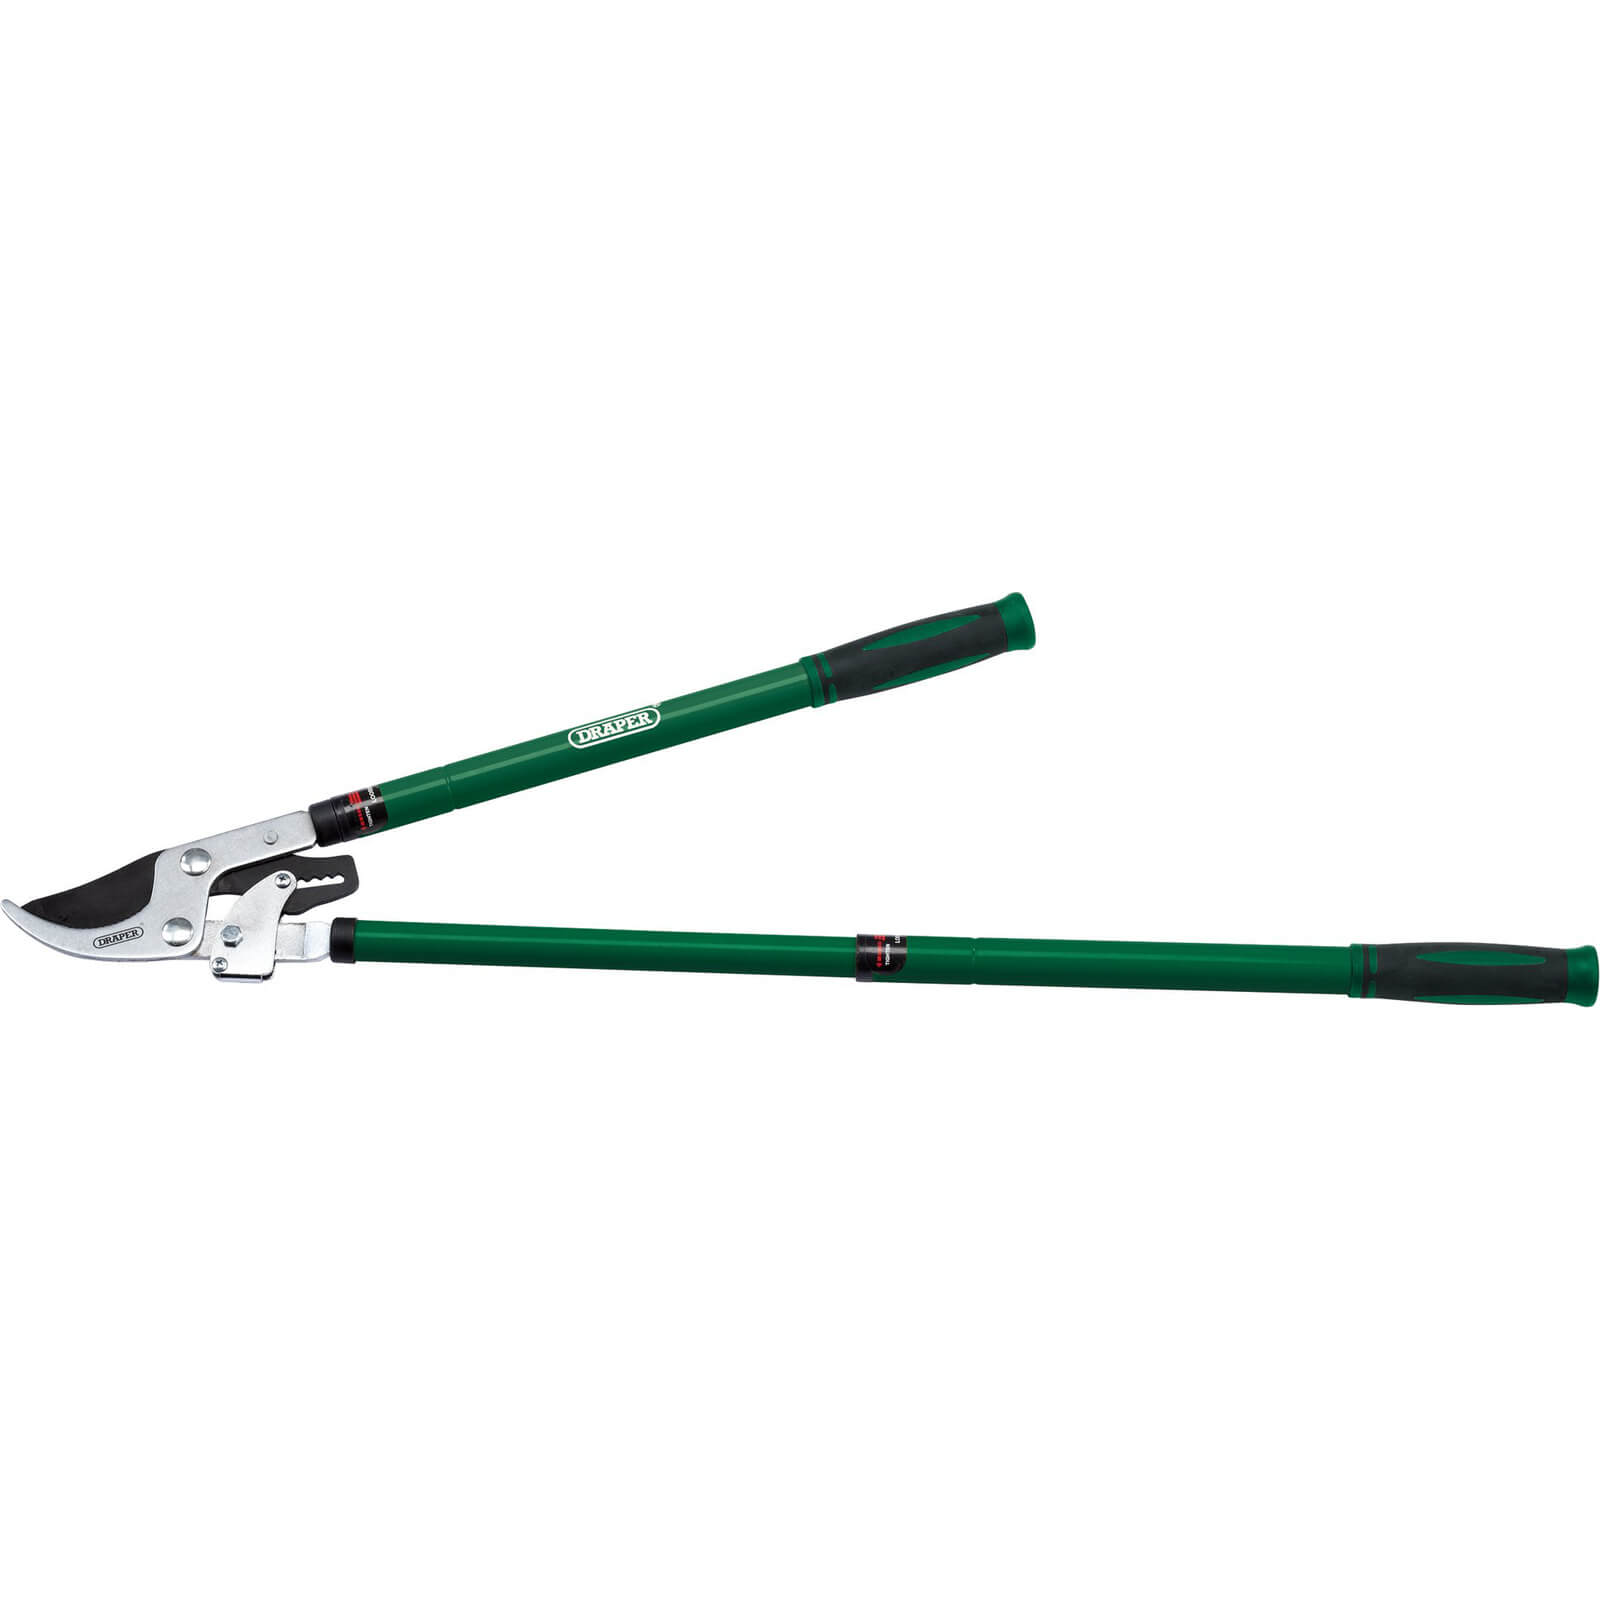 Image of Draper Telescopic Ratchet Action Bypass Loppers 800mm